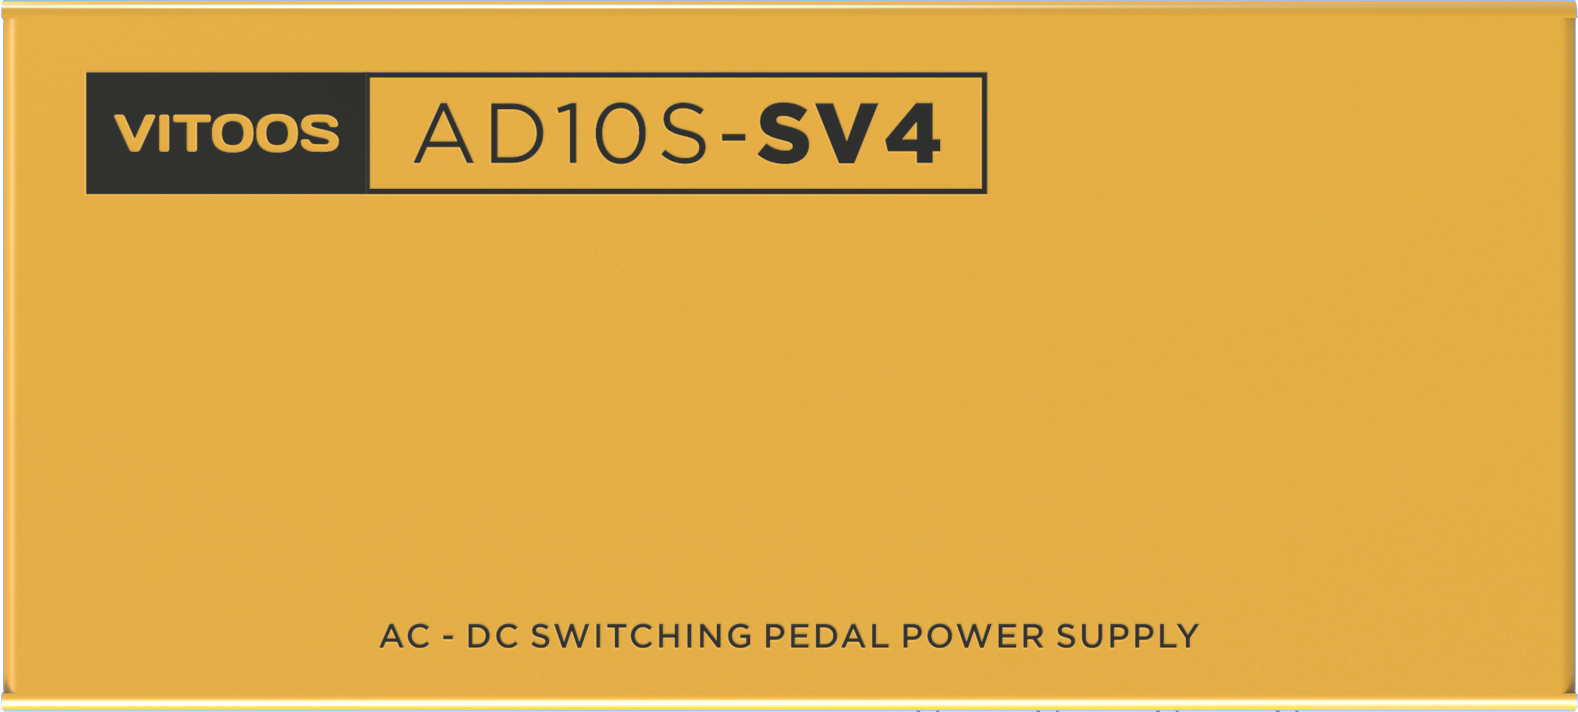 Vitoos AD10S-SV4 AC-DC Switching Pedal Power Supply